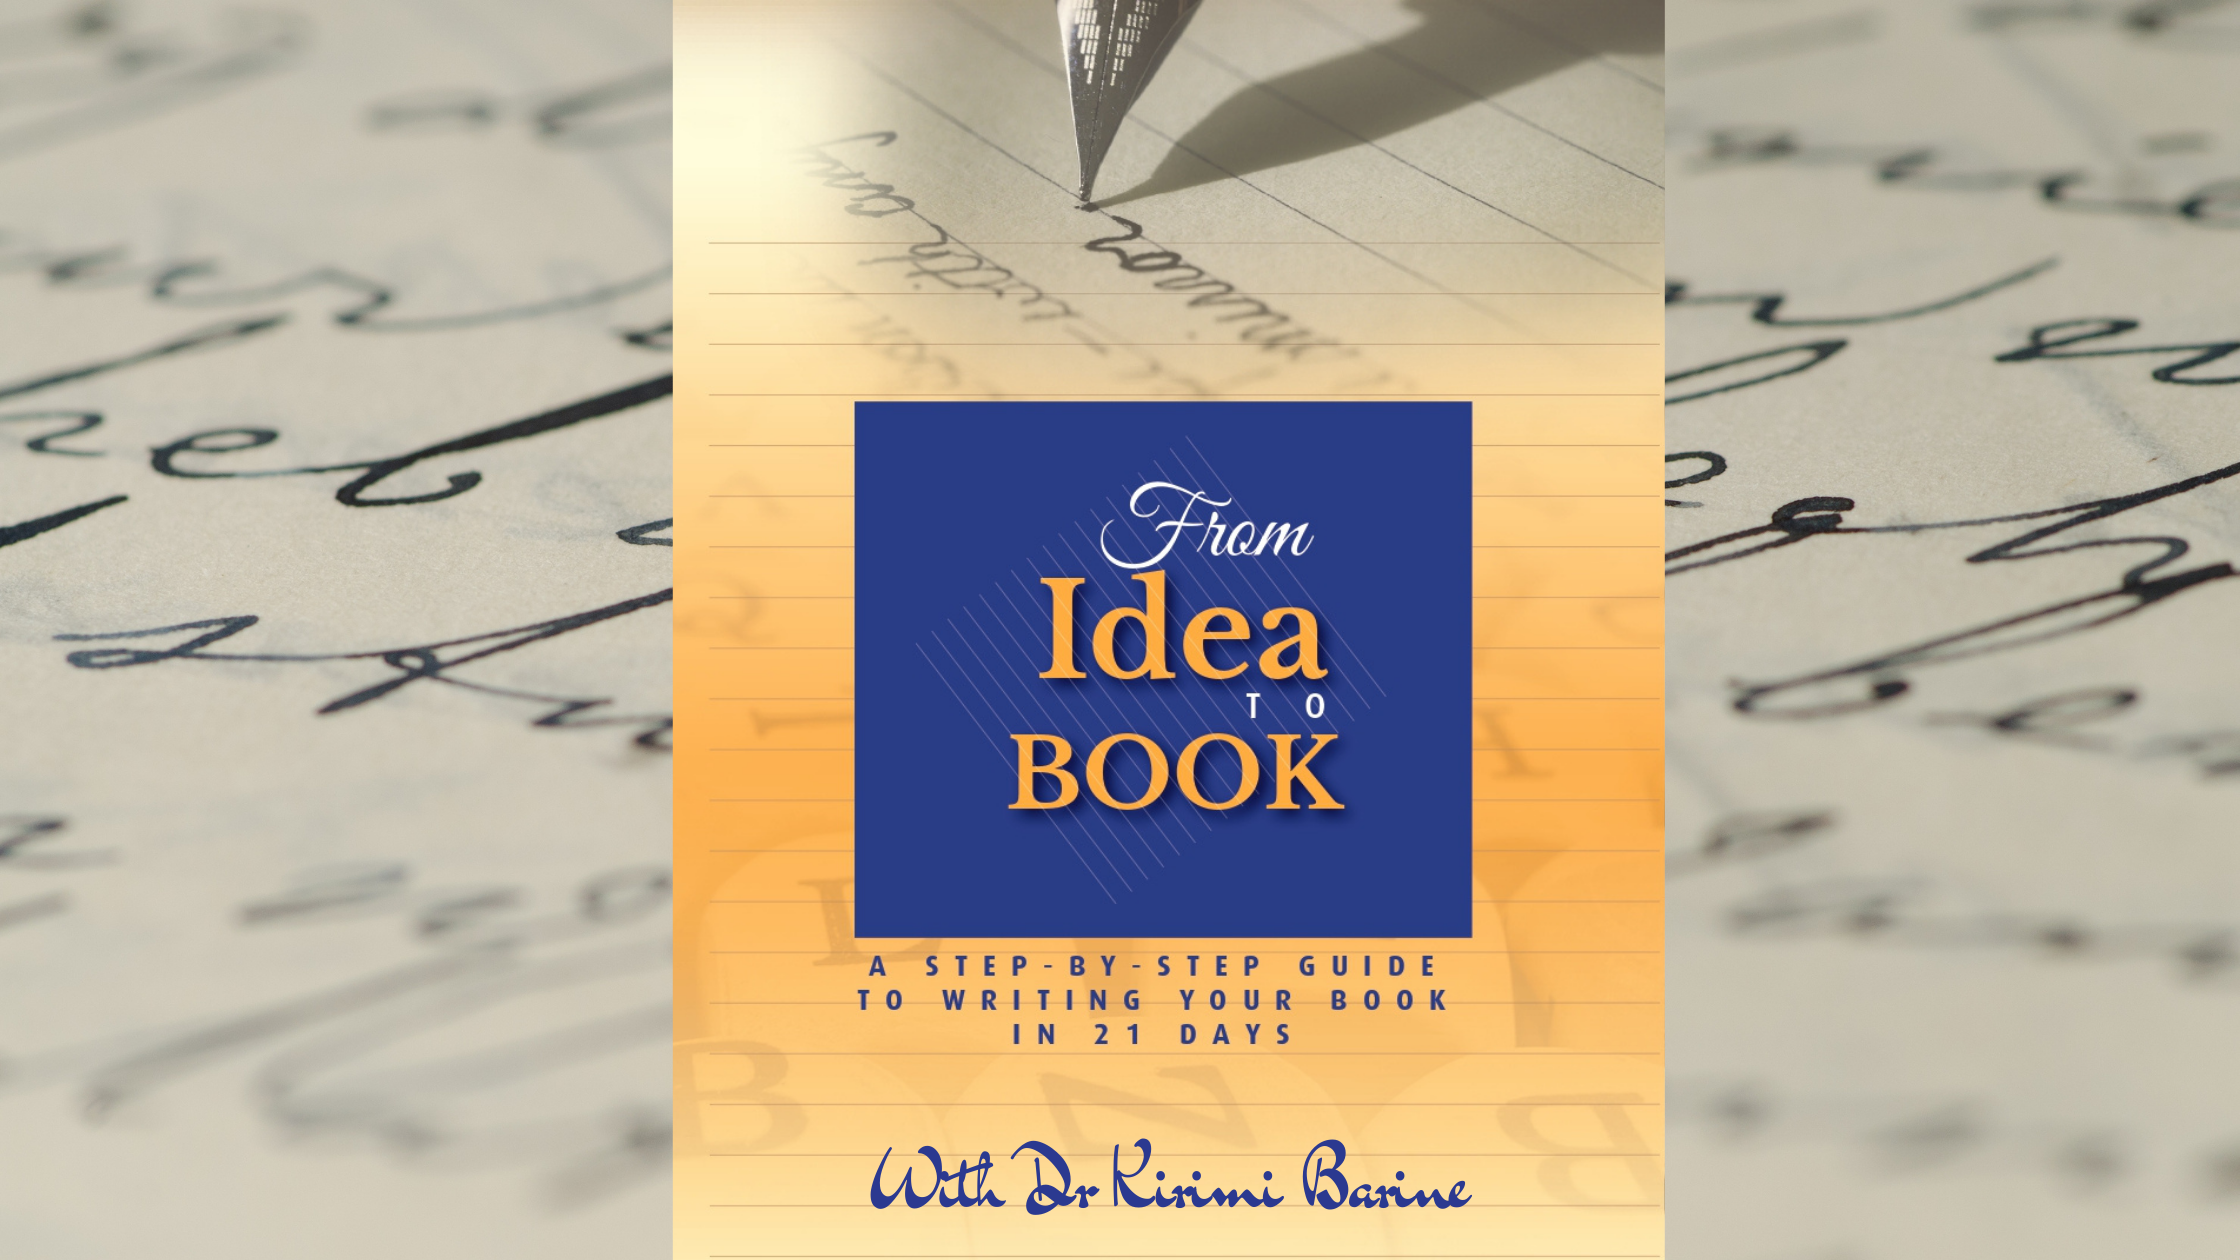 FROM IDEA TO BOOK IN 21 DAYS